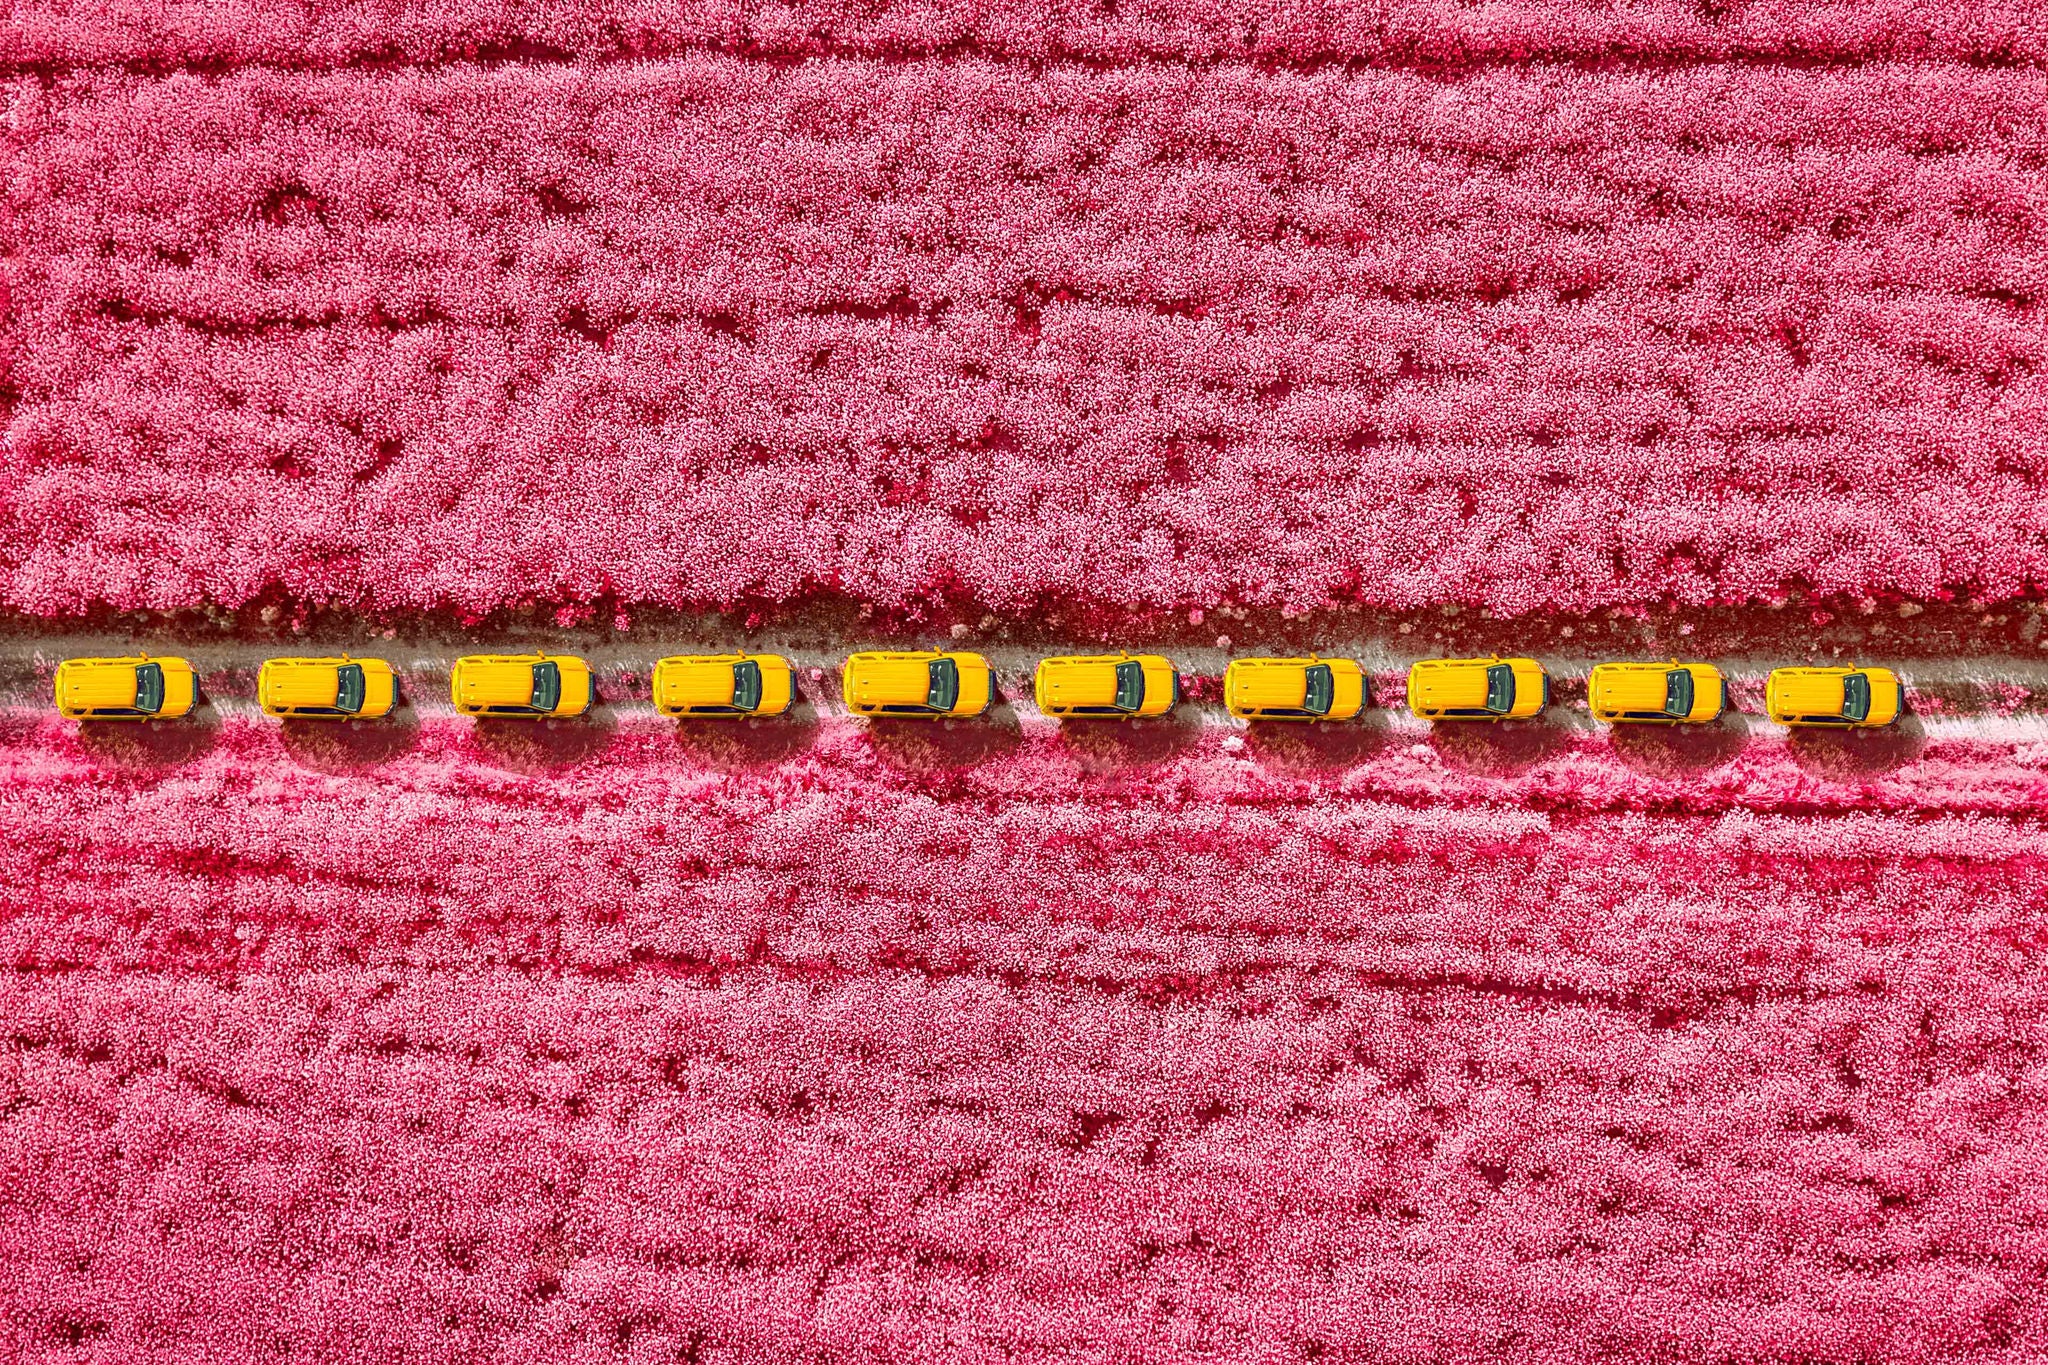 Aerial view of line of yellow cars in pink field